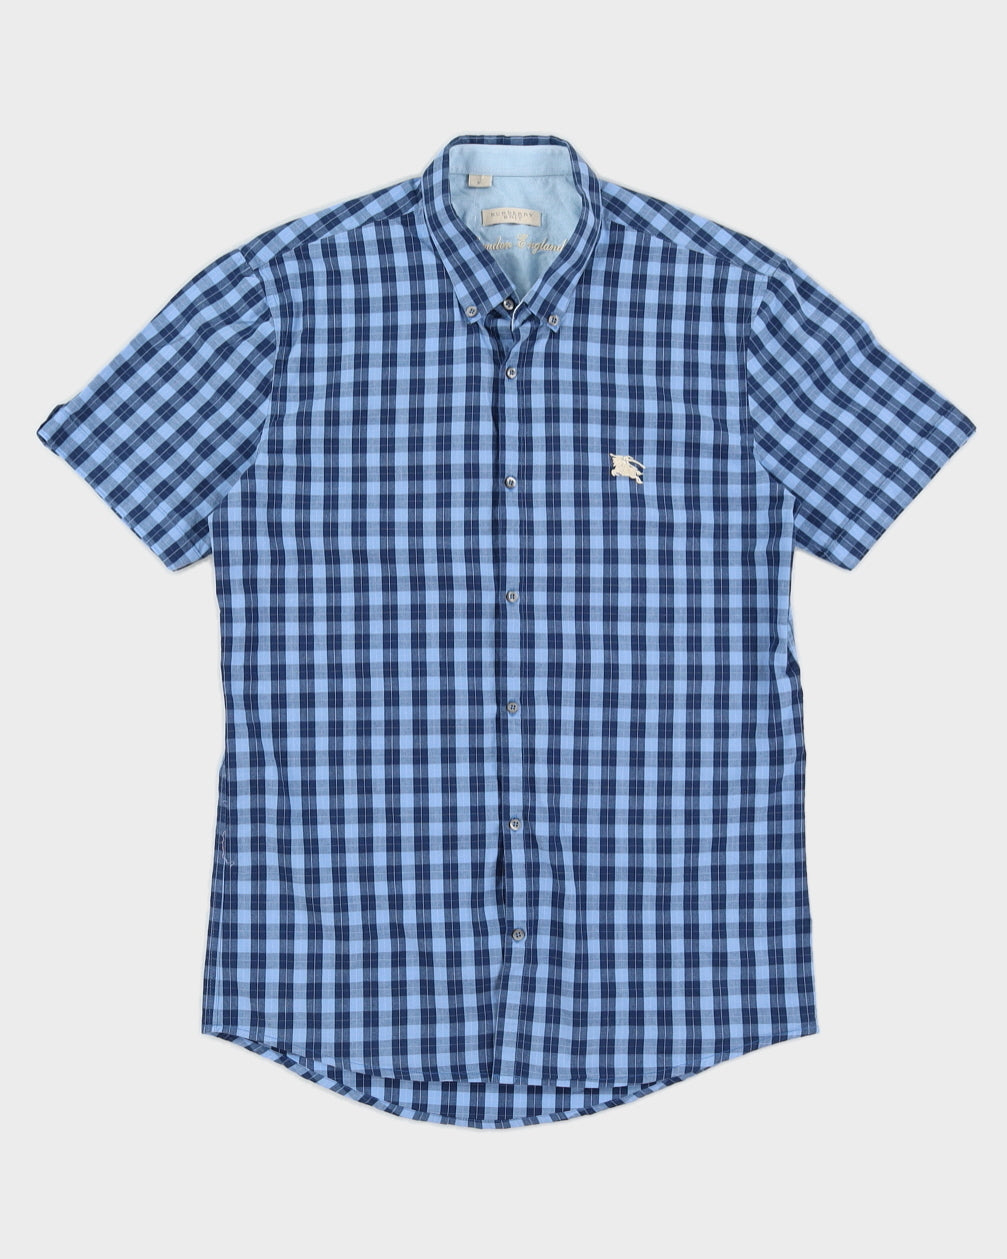 Burberry Brit Blue Checked Short Sleeved Shirt - S